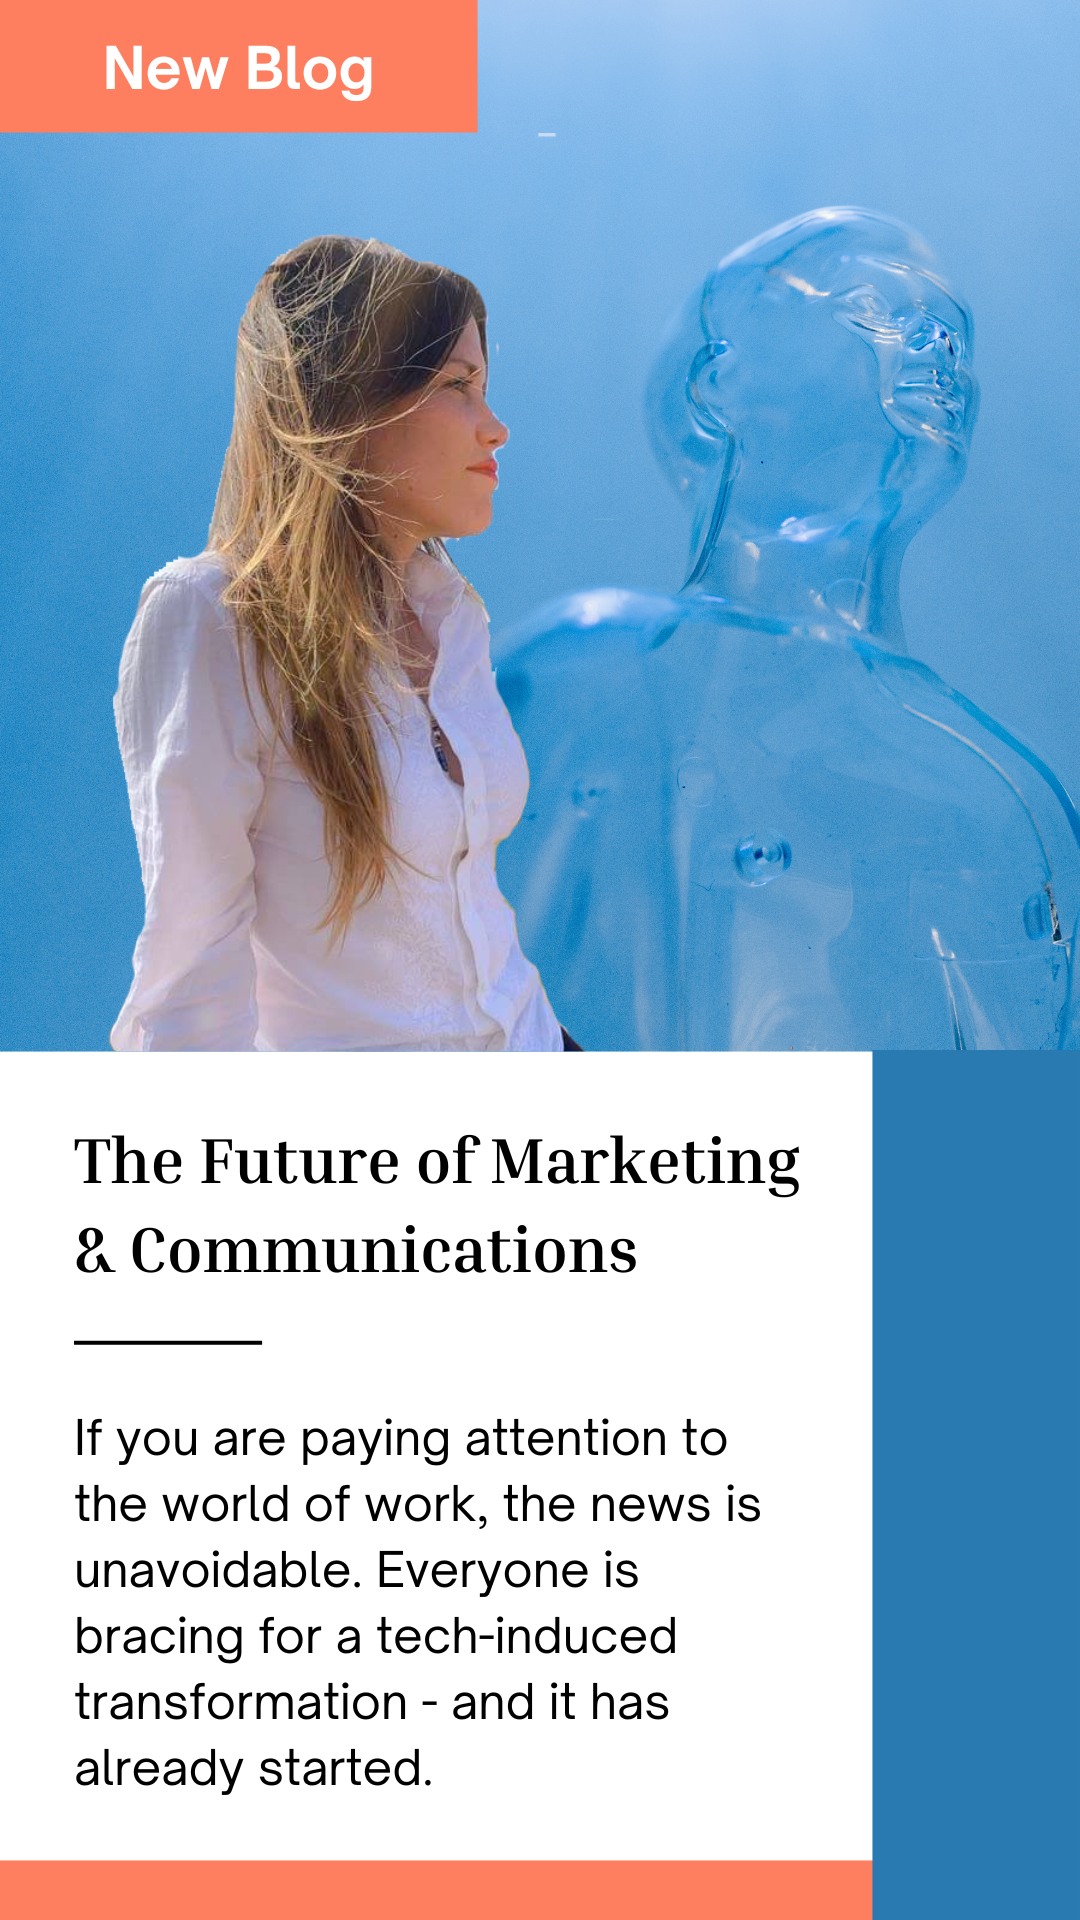 The future of marketing and communications